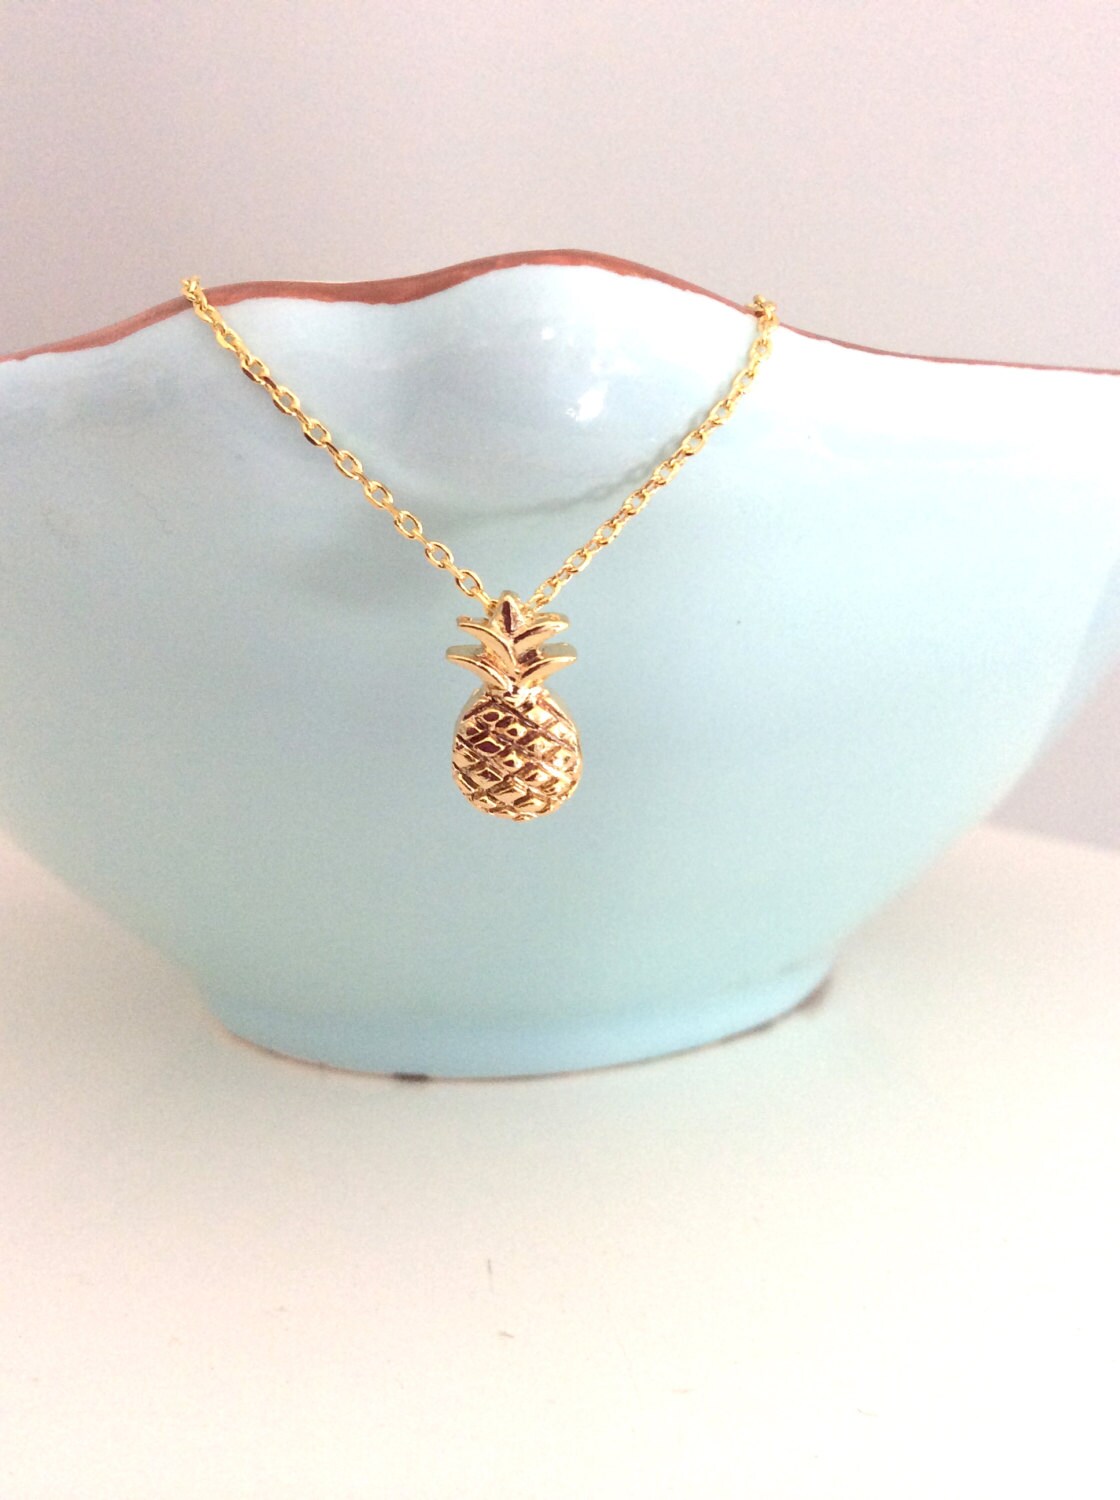 Pineapple Necklace Gold Pineapple Necklace Dainty Gold Necklace Gifts for Her Best Friend gift Girlfriend Gifts birthday gift christmas gift